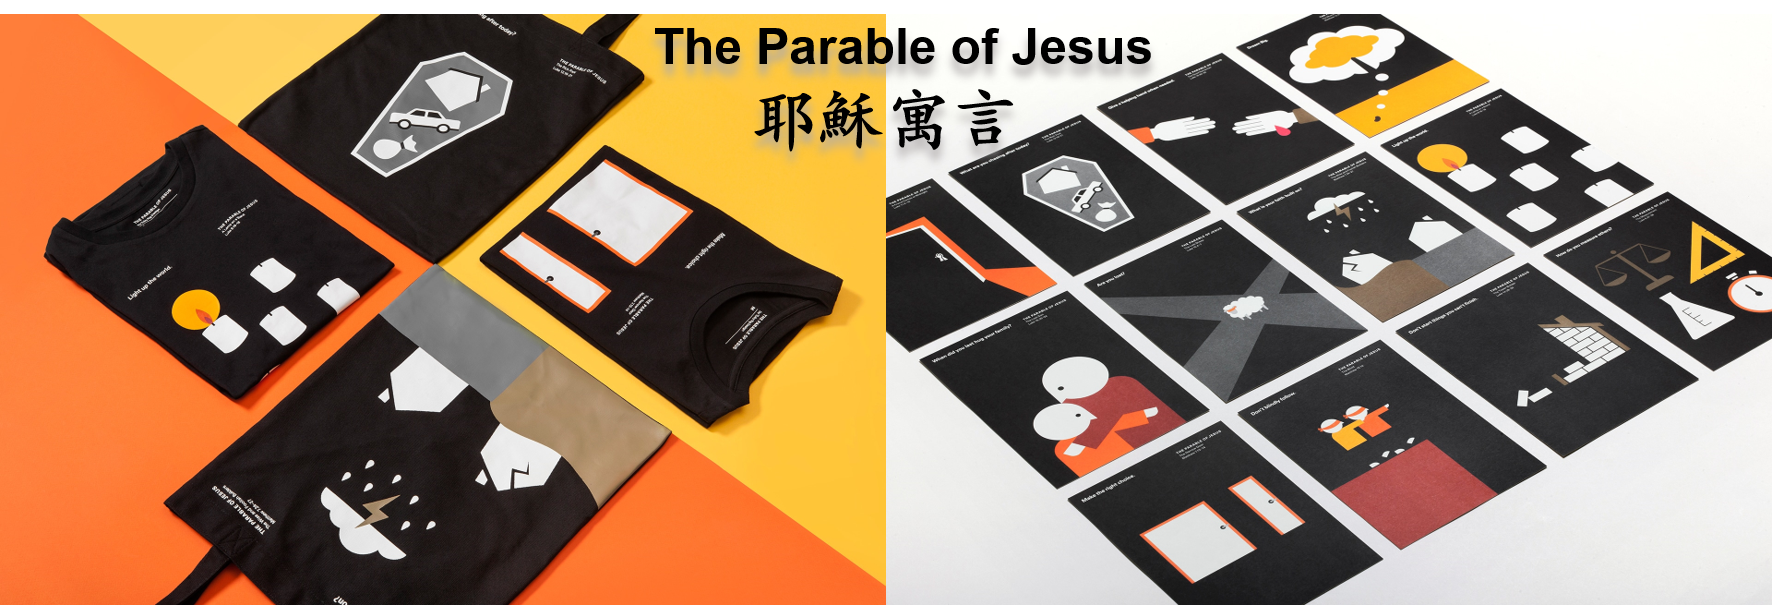 <font size="+1">Introducing The Parable of Jesus, a design project by Toby Ng Design that aims to send you positive vibes. With a contemporary style and minimal touch, it draws life-related messages matched with corresponding classic stories and insights-rich illustrations one at a time. A mentor you can always refer to, The Parable of Jesus reminds us of small, simple yet day-changing ideas that are actually around us.

Parables are simple stories told alongside a truth as teaching aids to illustrate that truth. Jesus explained that His parables had a dual purpose: to reveal the truth to those who wanted to know and to conceal the truth from those who were indifferent. For seekers of the truth, each of these designs serve as a roadmap to guide and encourage us to examine the truth for ourselves, as well as apply it in our daily lives. Whatever our intentions and motivations - only our hearts know. </font>
